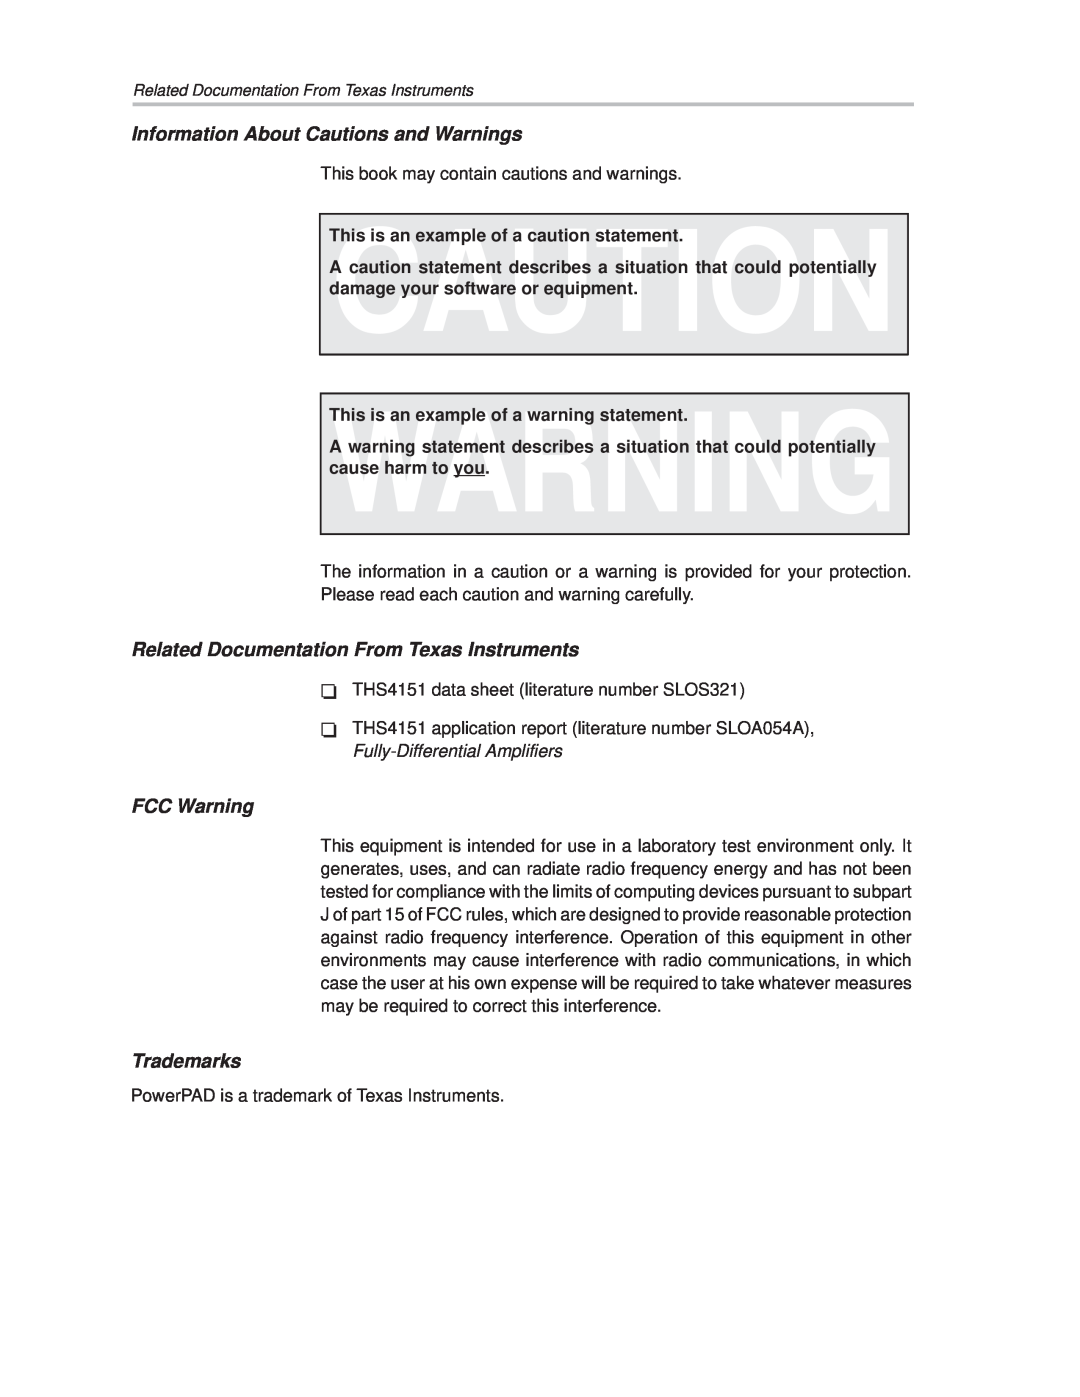 Texas Instruments THS4151 manual Information About Cautions and Warnings, Related Documentation From Texas Instruments 